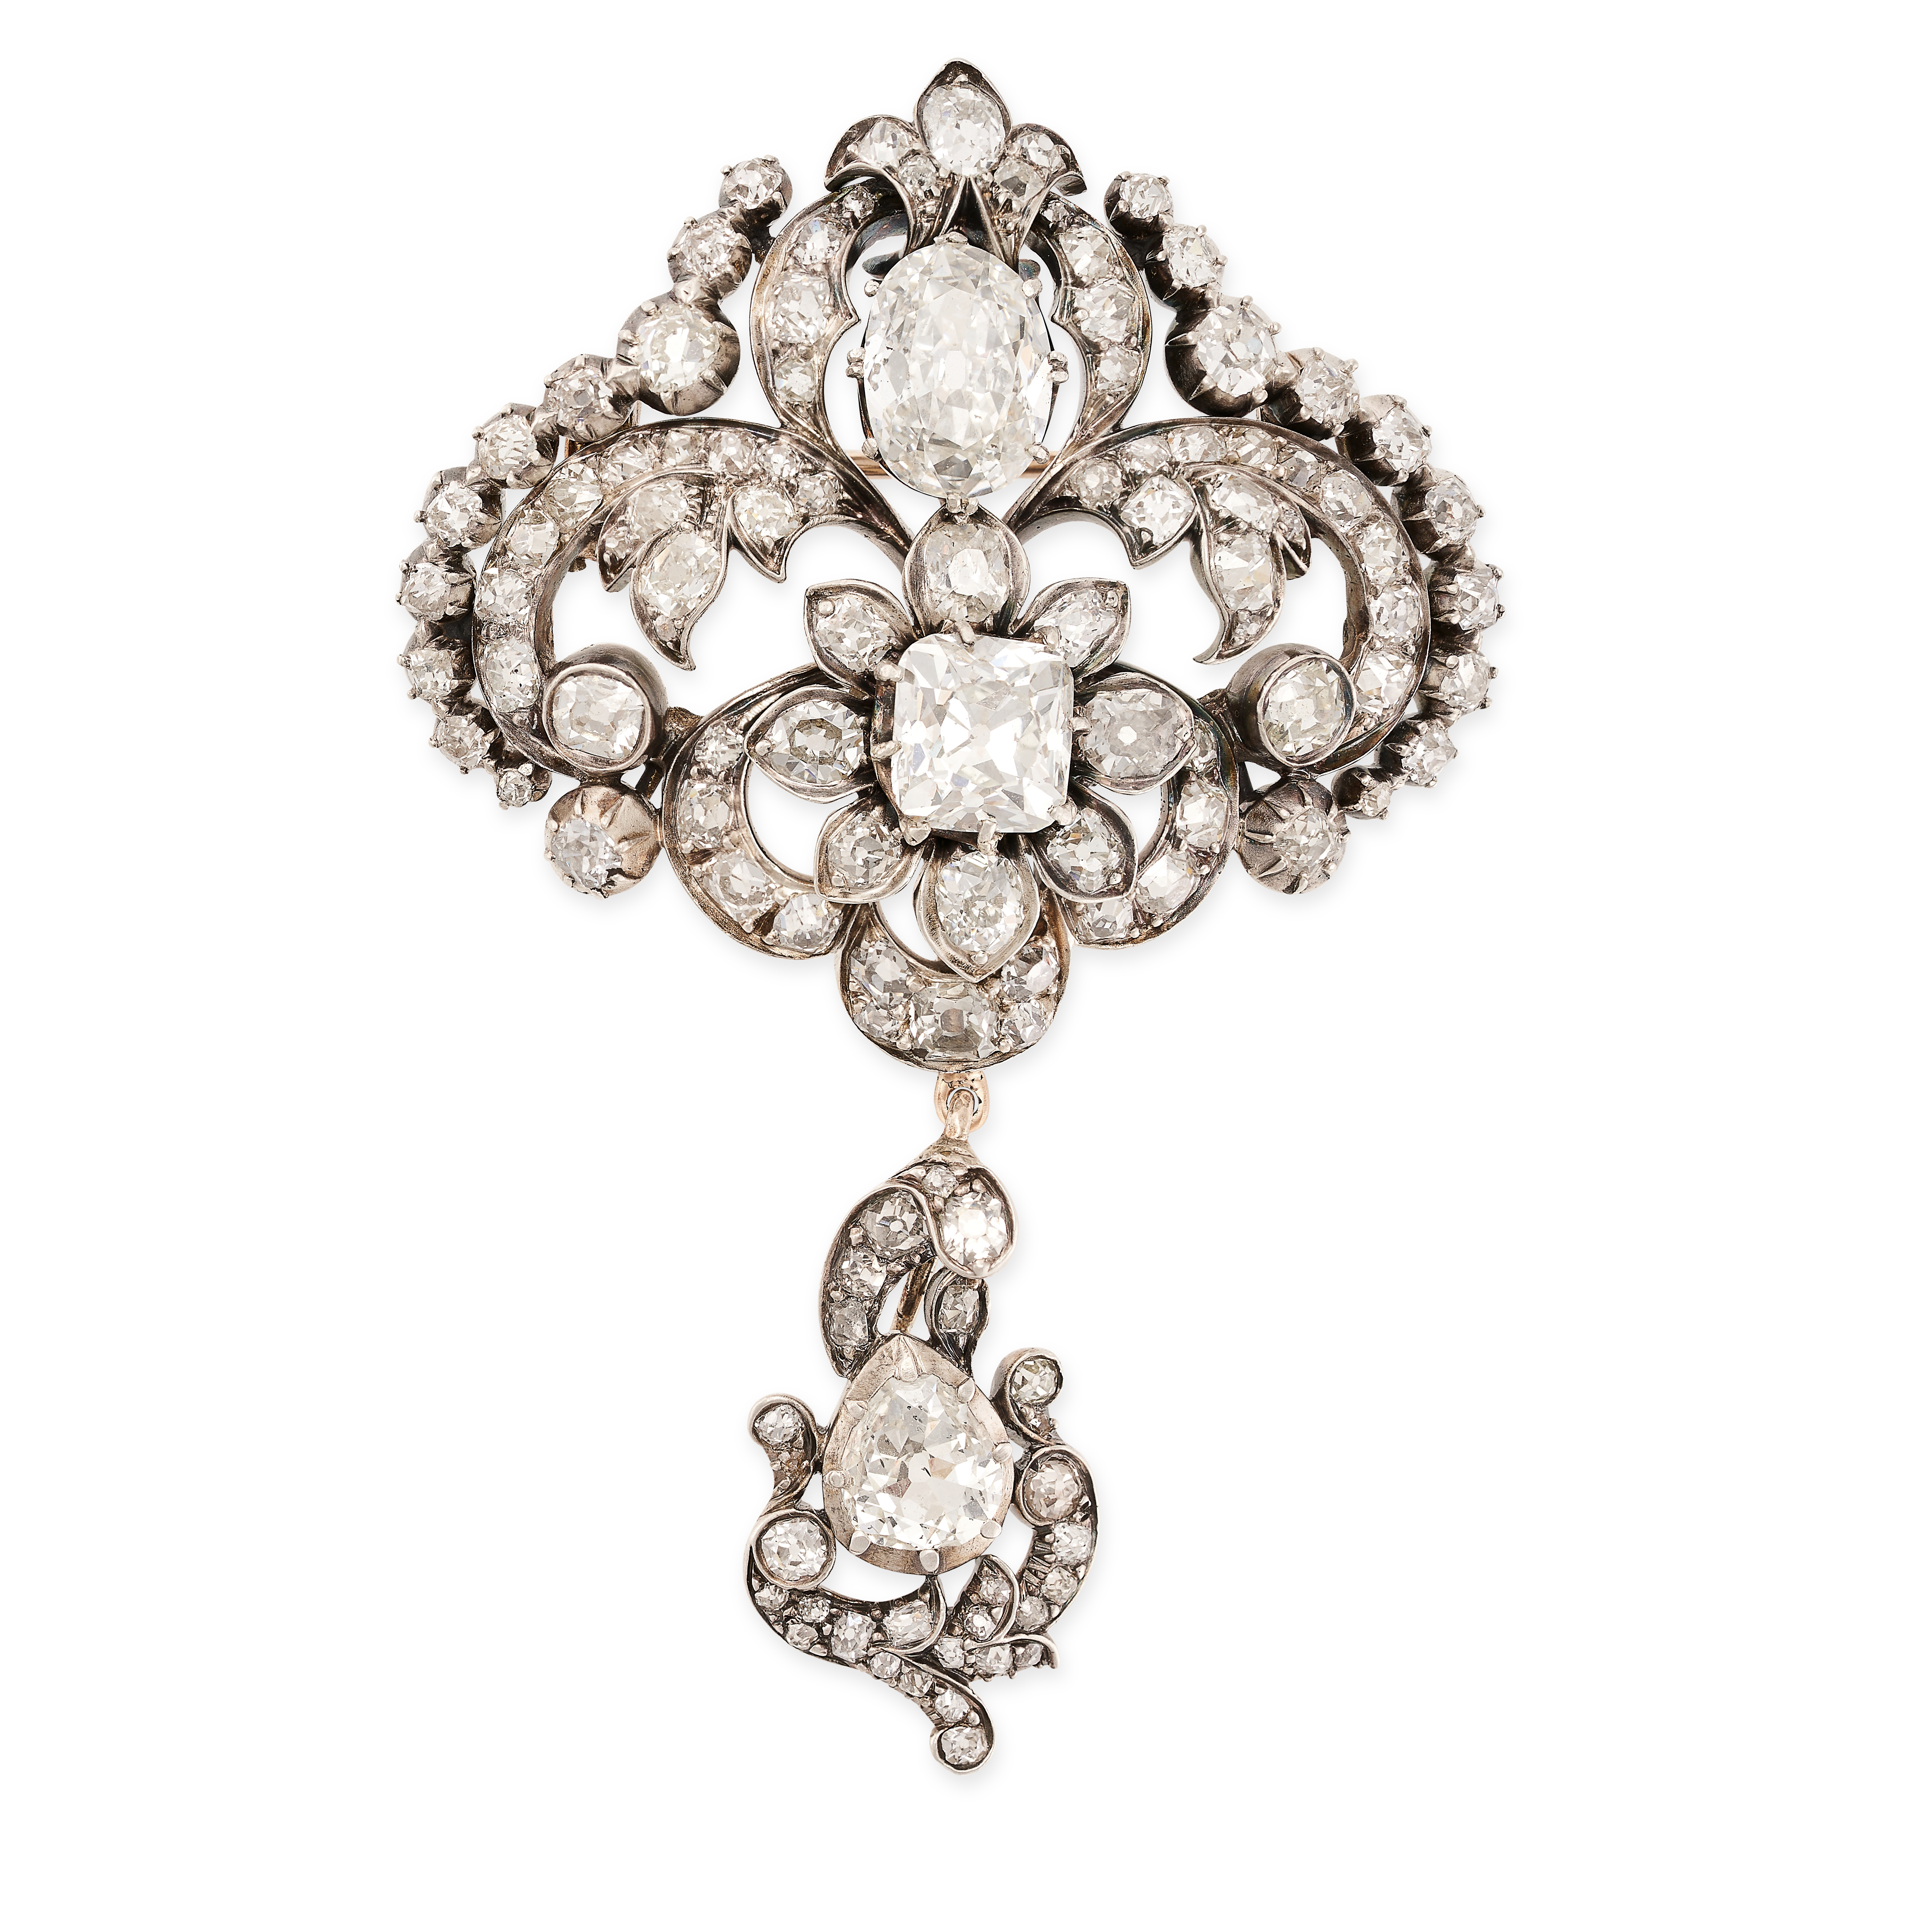 A FINE ANTIQUE DIAMOND BROOCH, 19TH CENTURY in yellow gold and silver, set with two principal oval